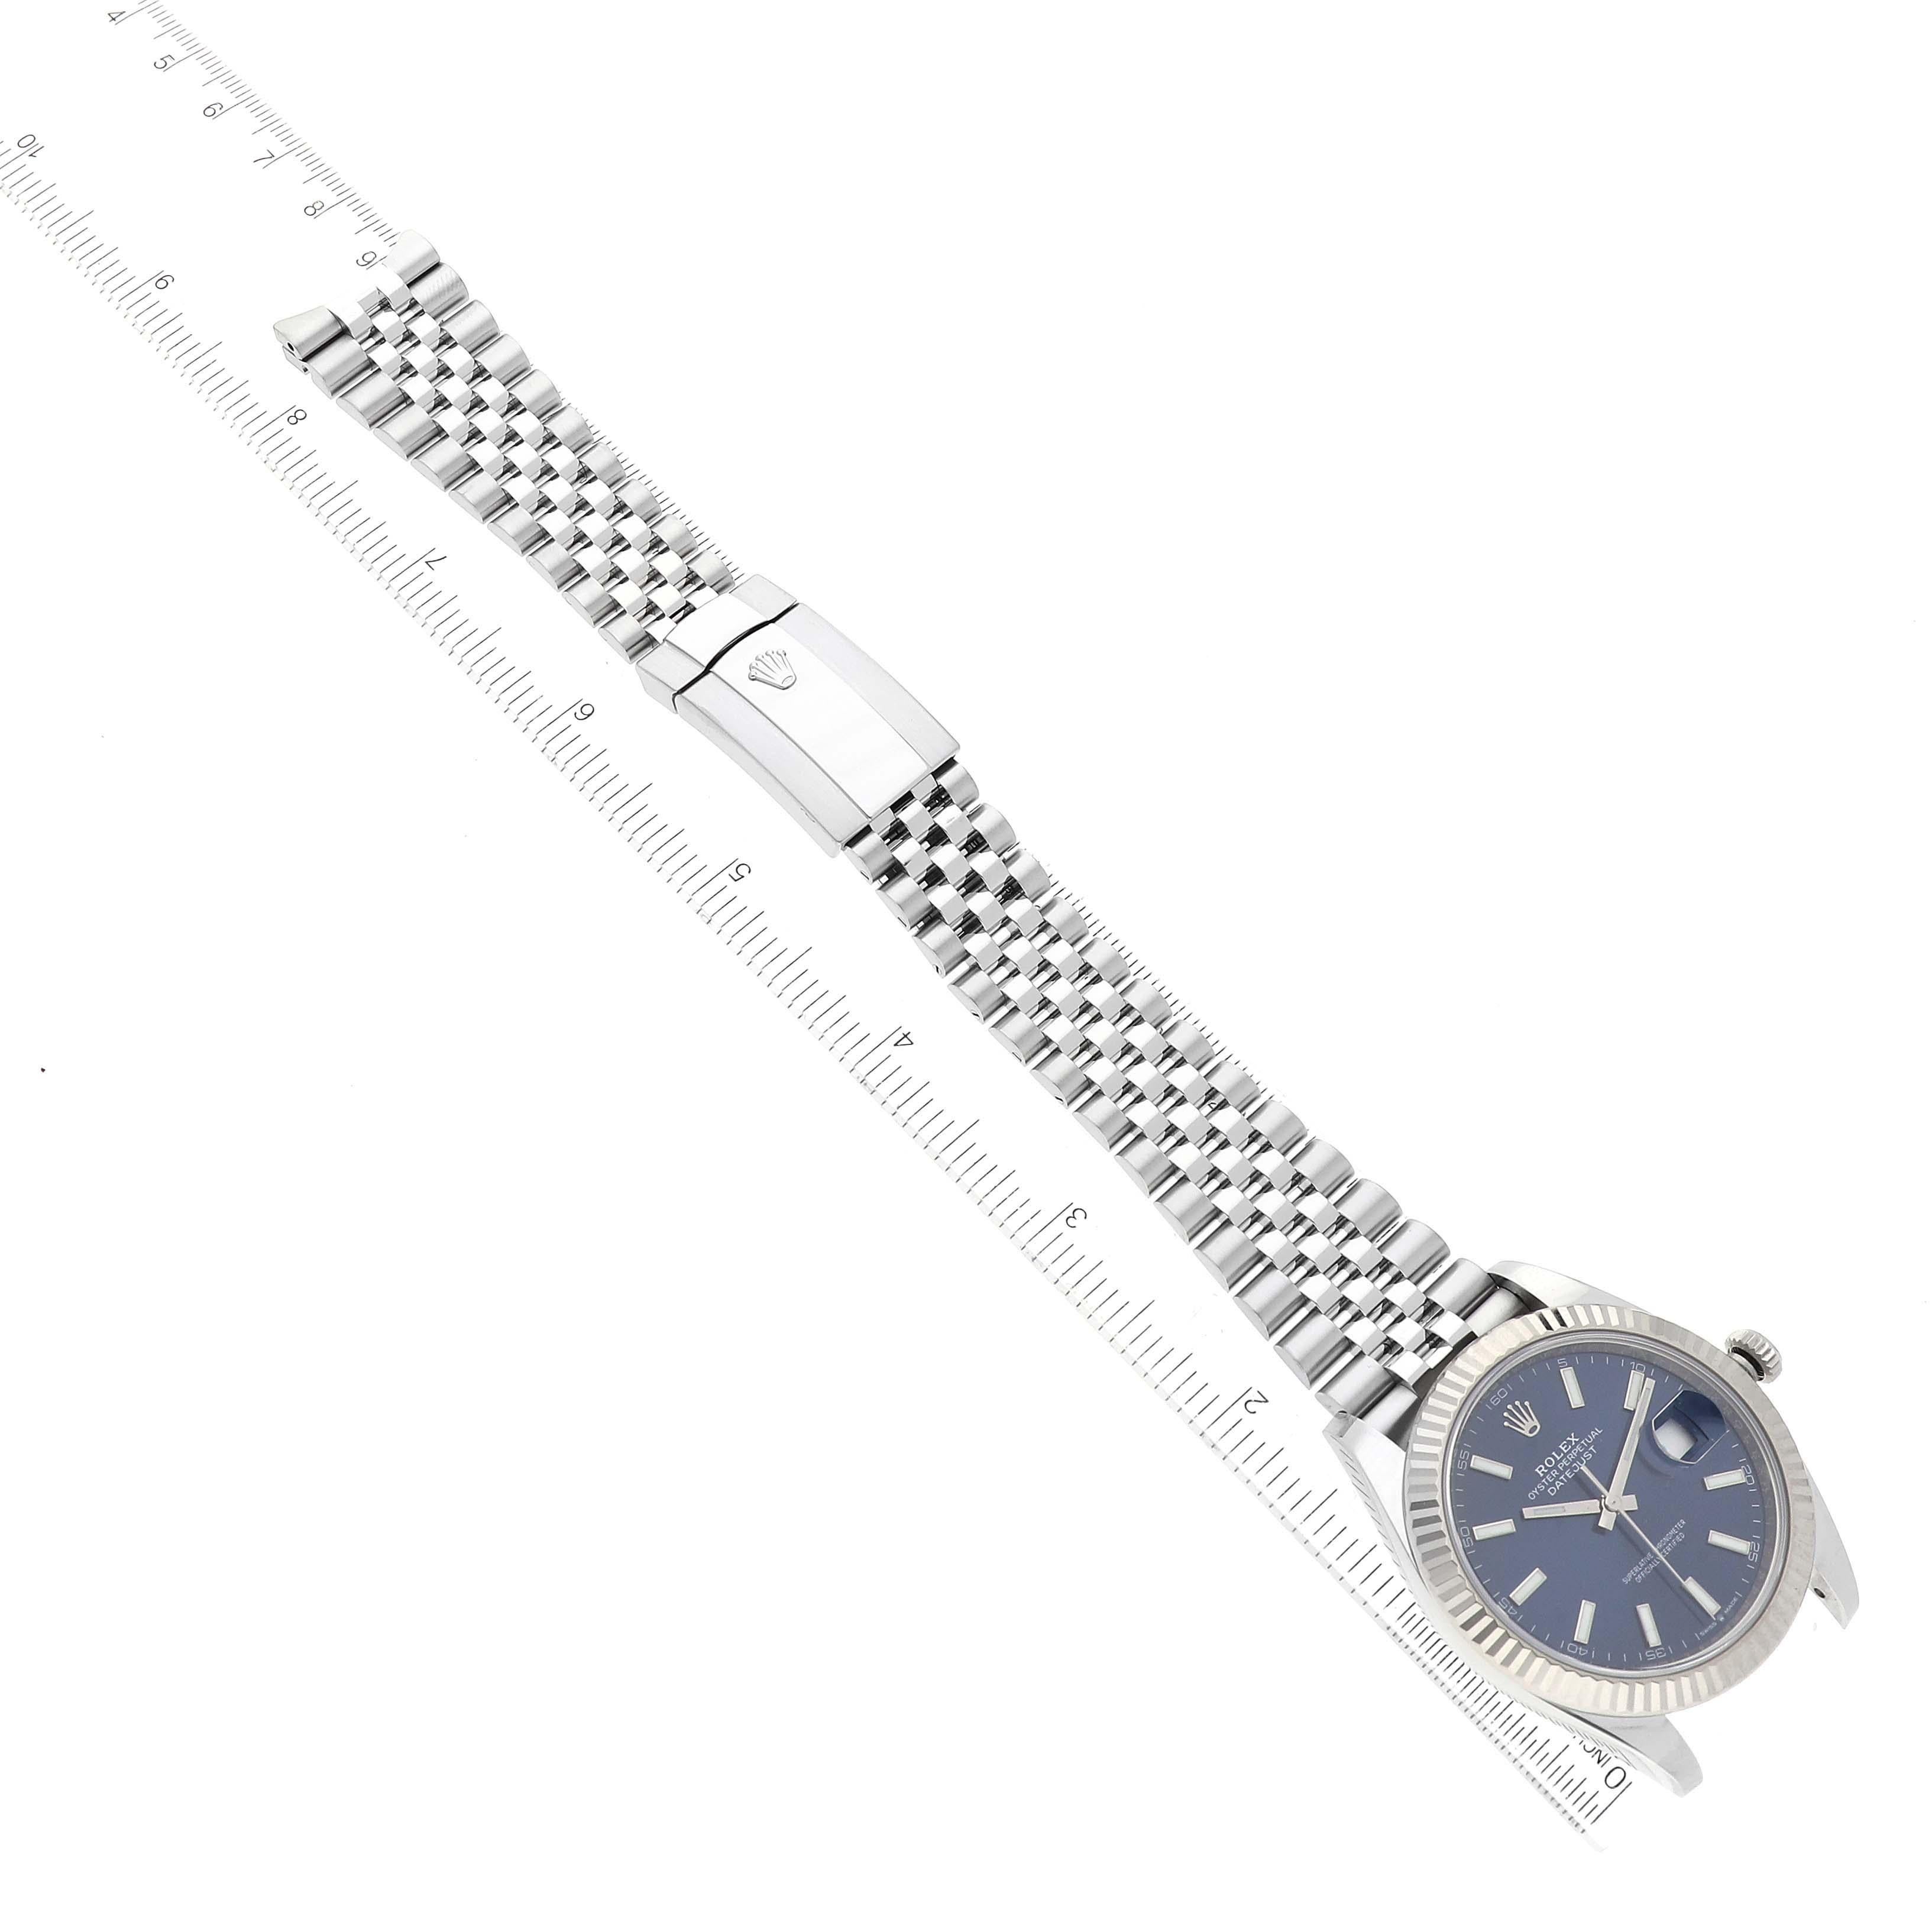 Rolex Datejust 41 Steel White Gold Blue Dial Mens Watch 126334 Box Card 3